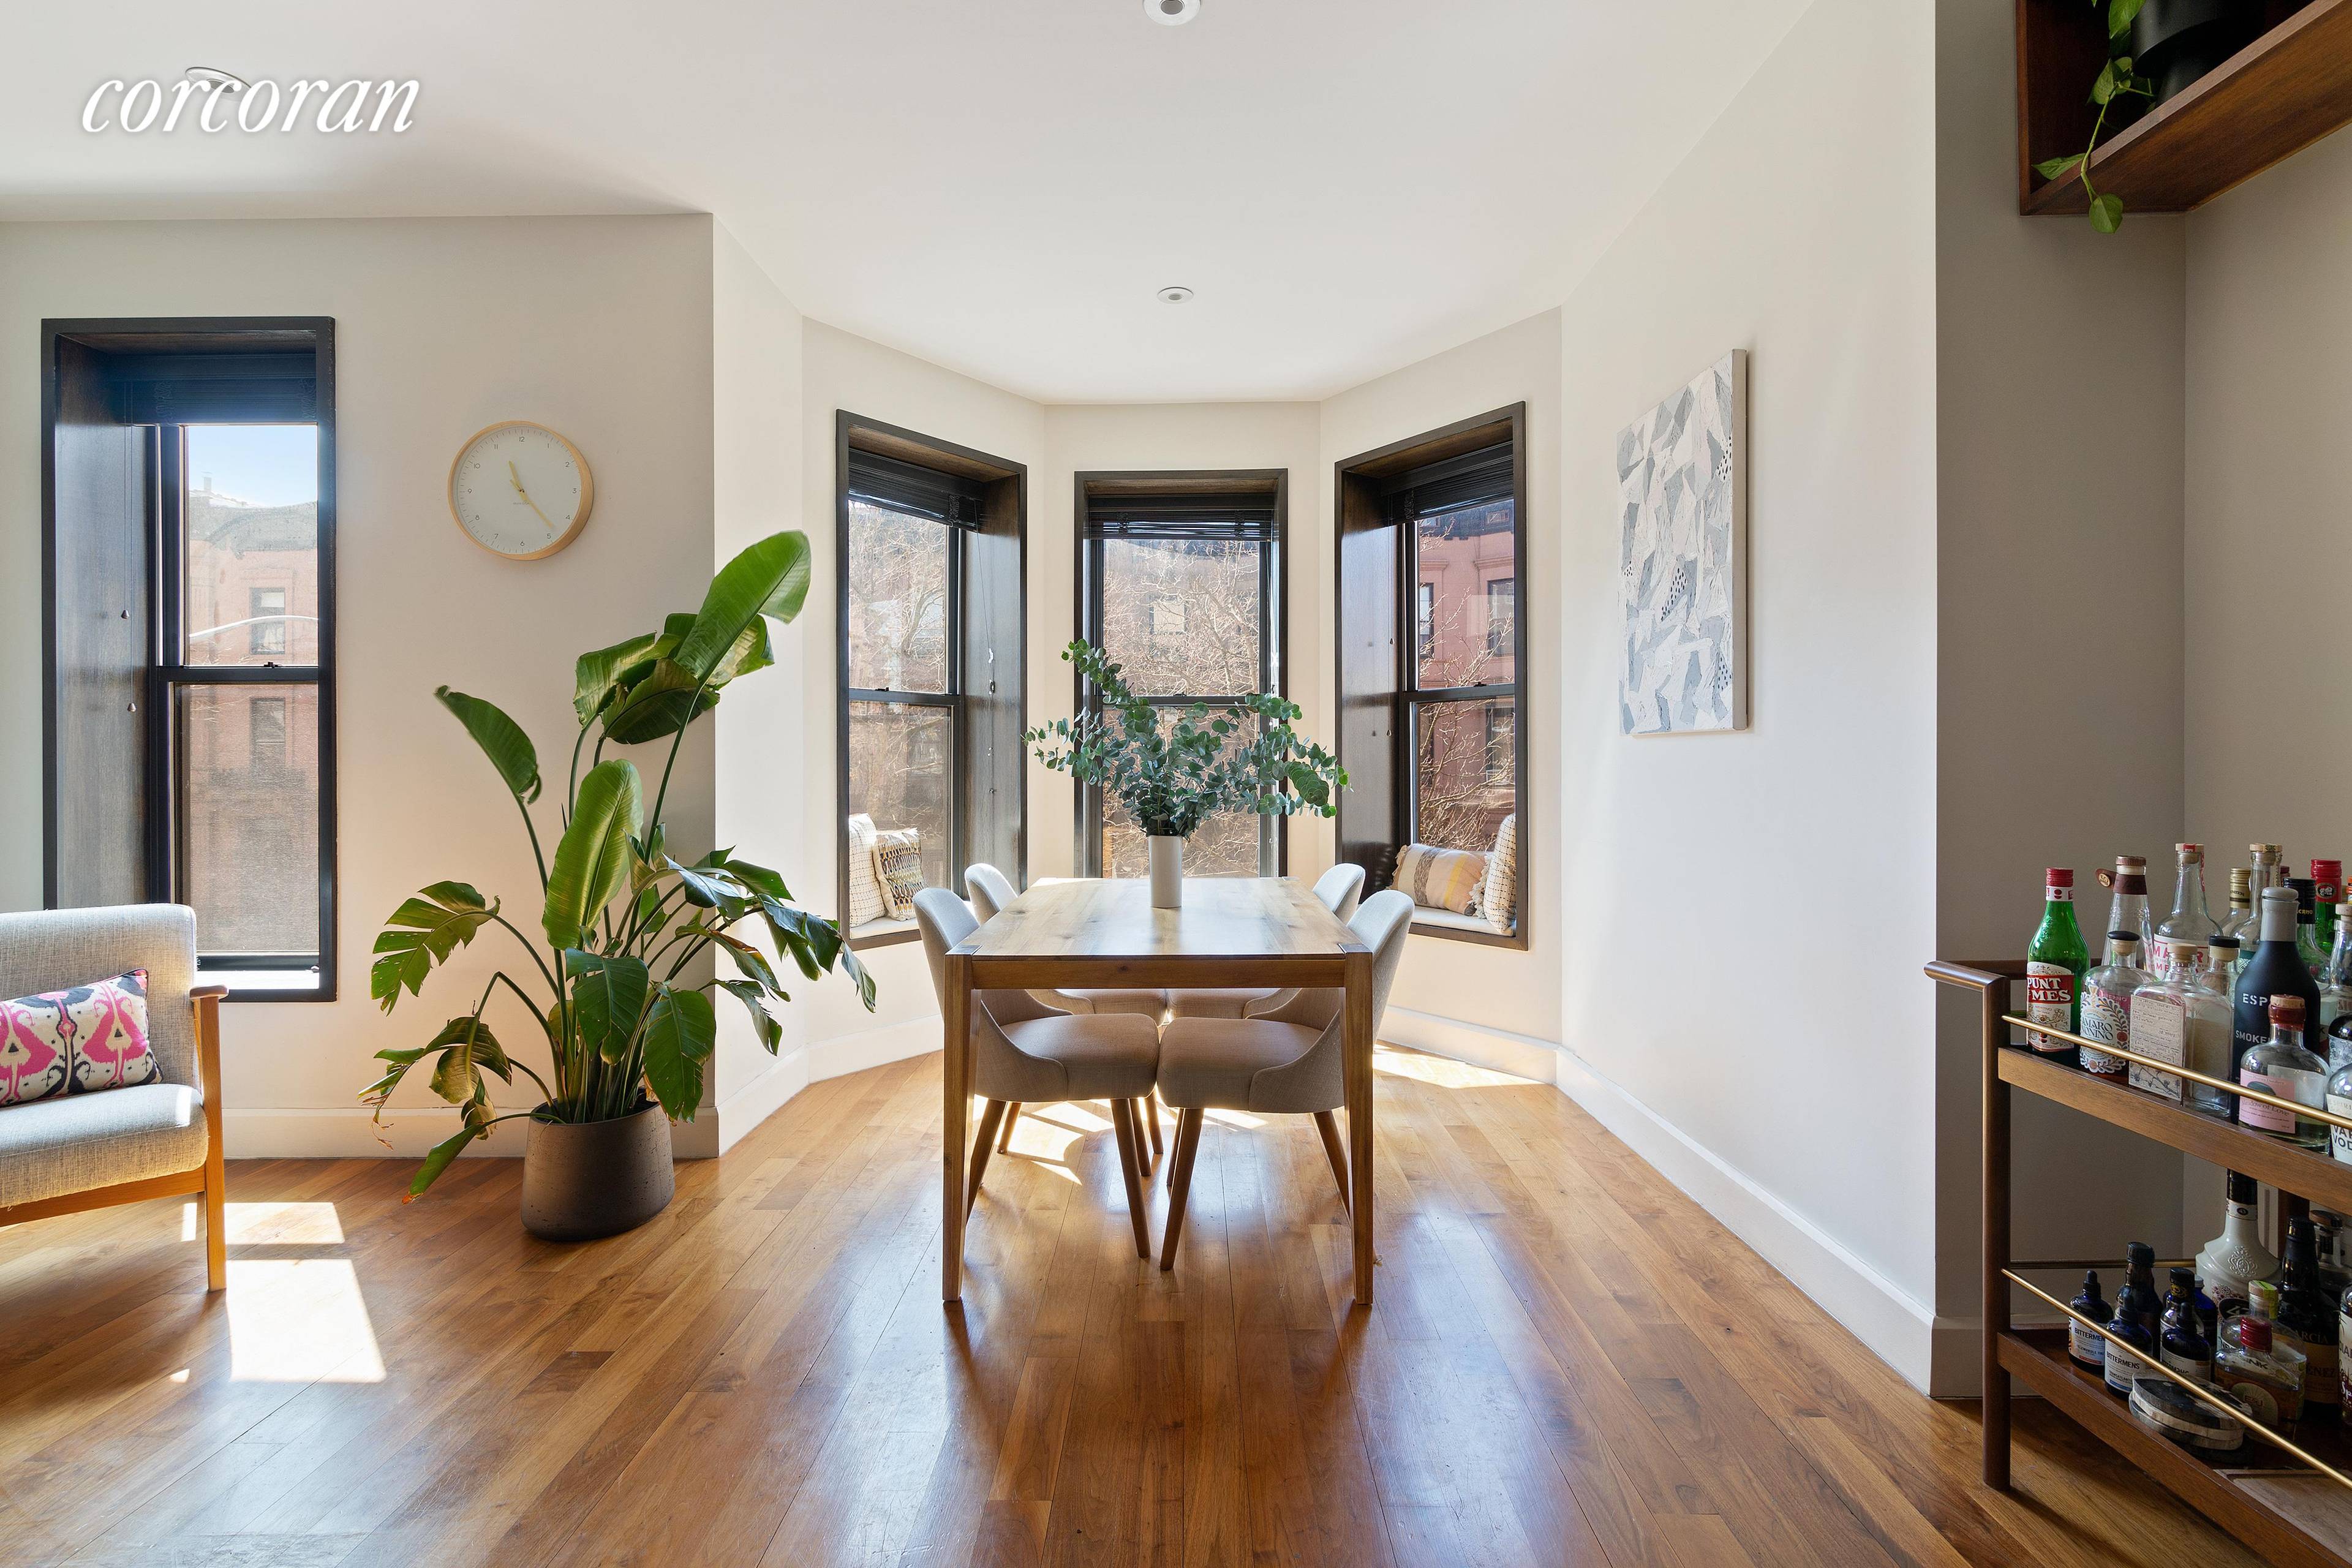 219 Saint Johns Place, 2 Brand new to market, this precious 2 bedroom pre war jewel box has it all prime location, newly renovated interiors, two ample bedrooms, two well ...